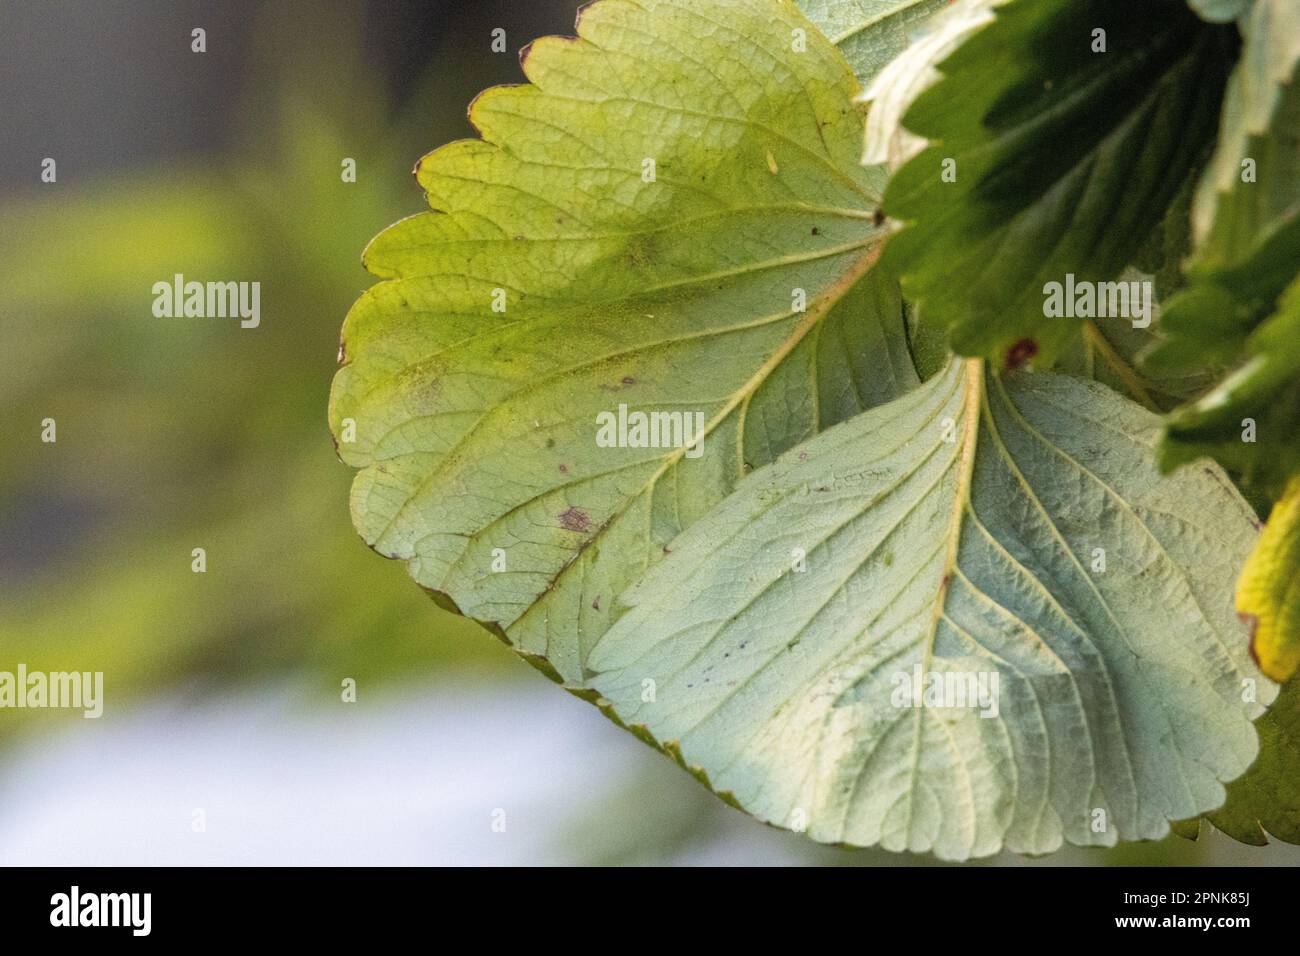 the underside of a strawberry plant leaf isolated Stock Photo